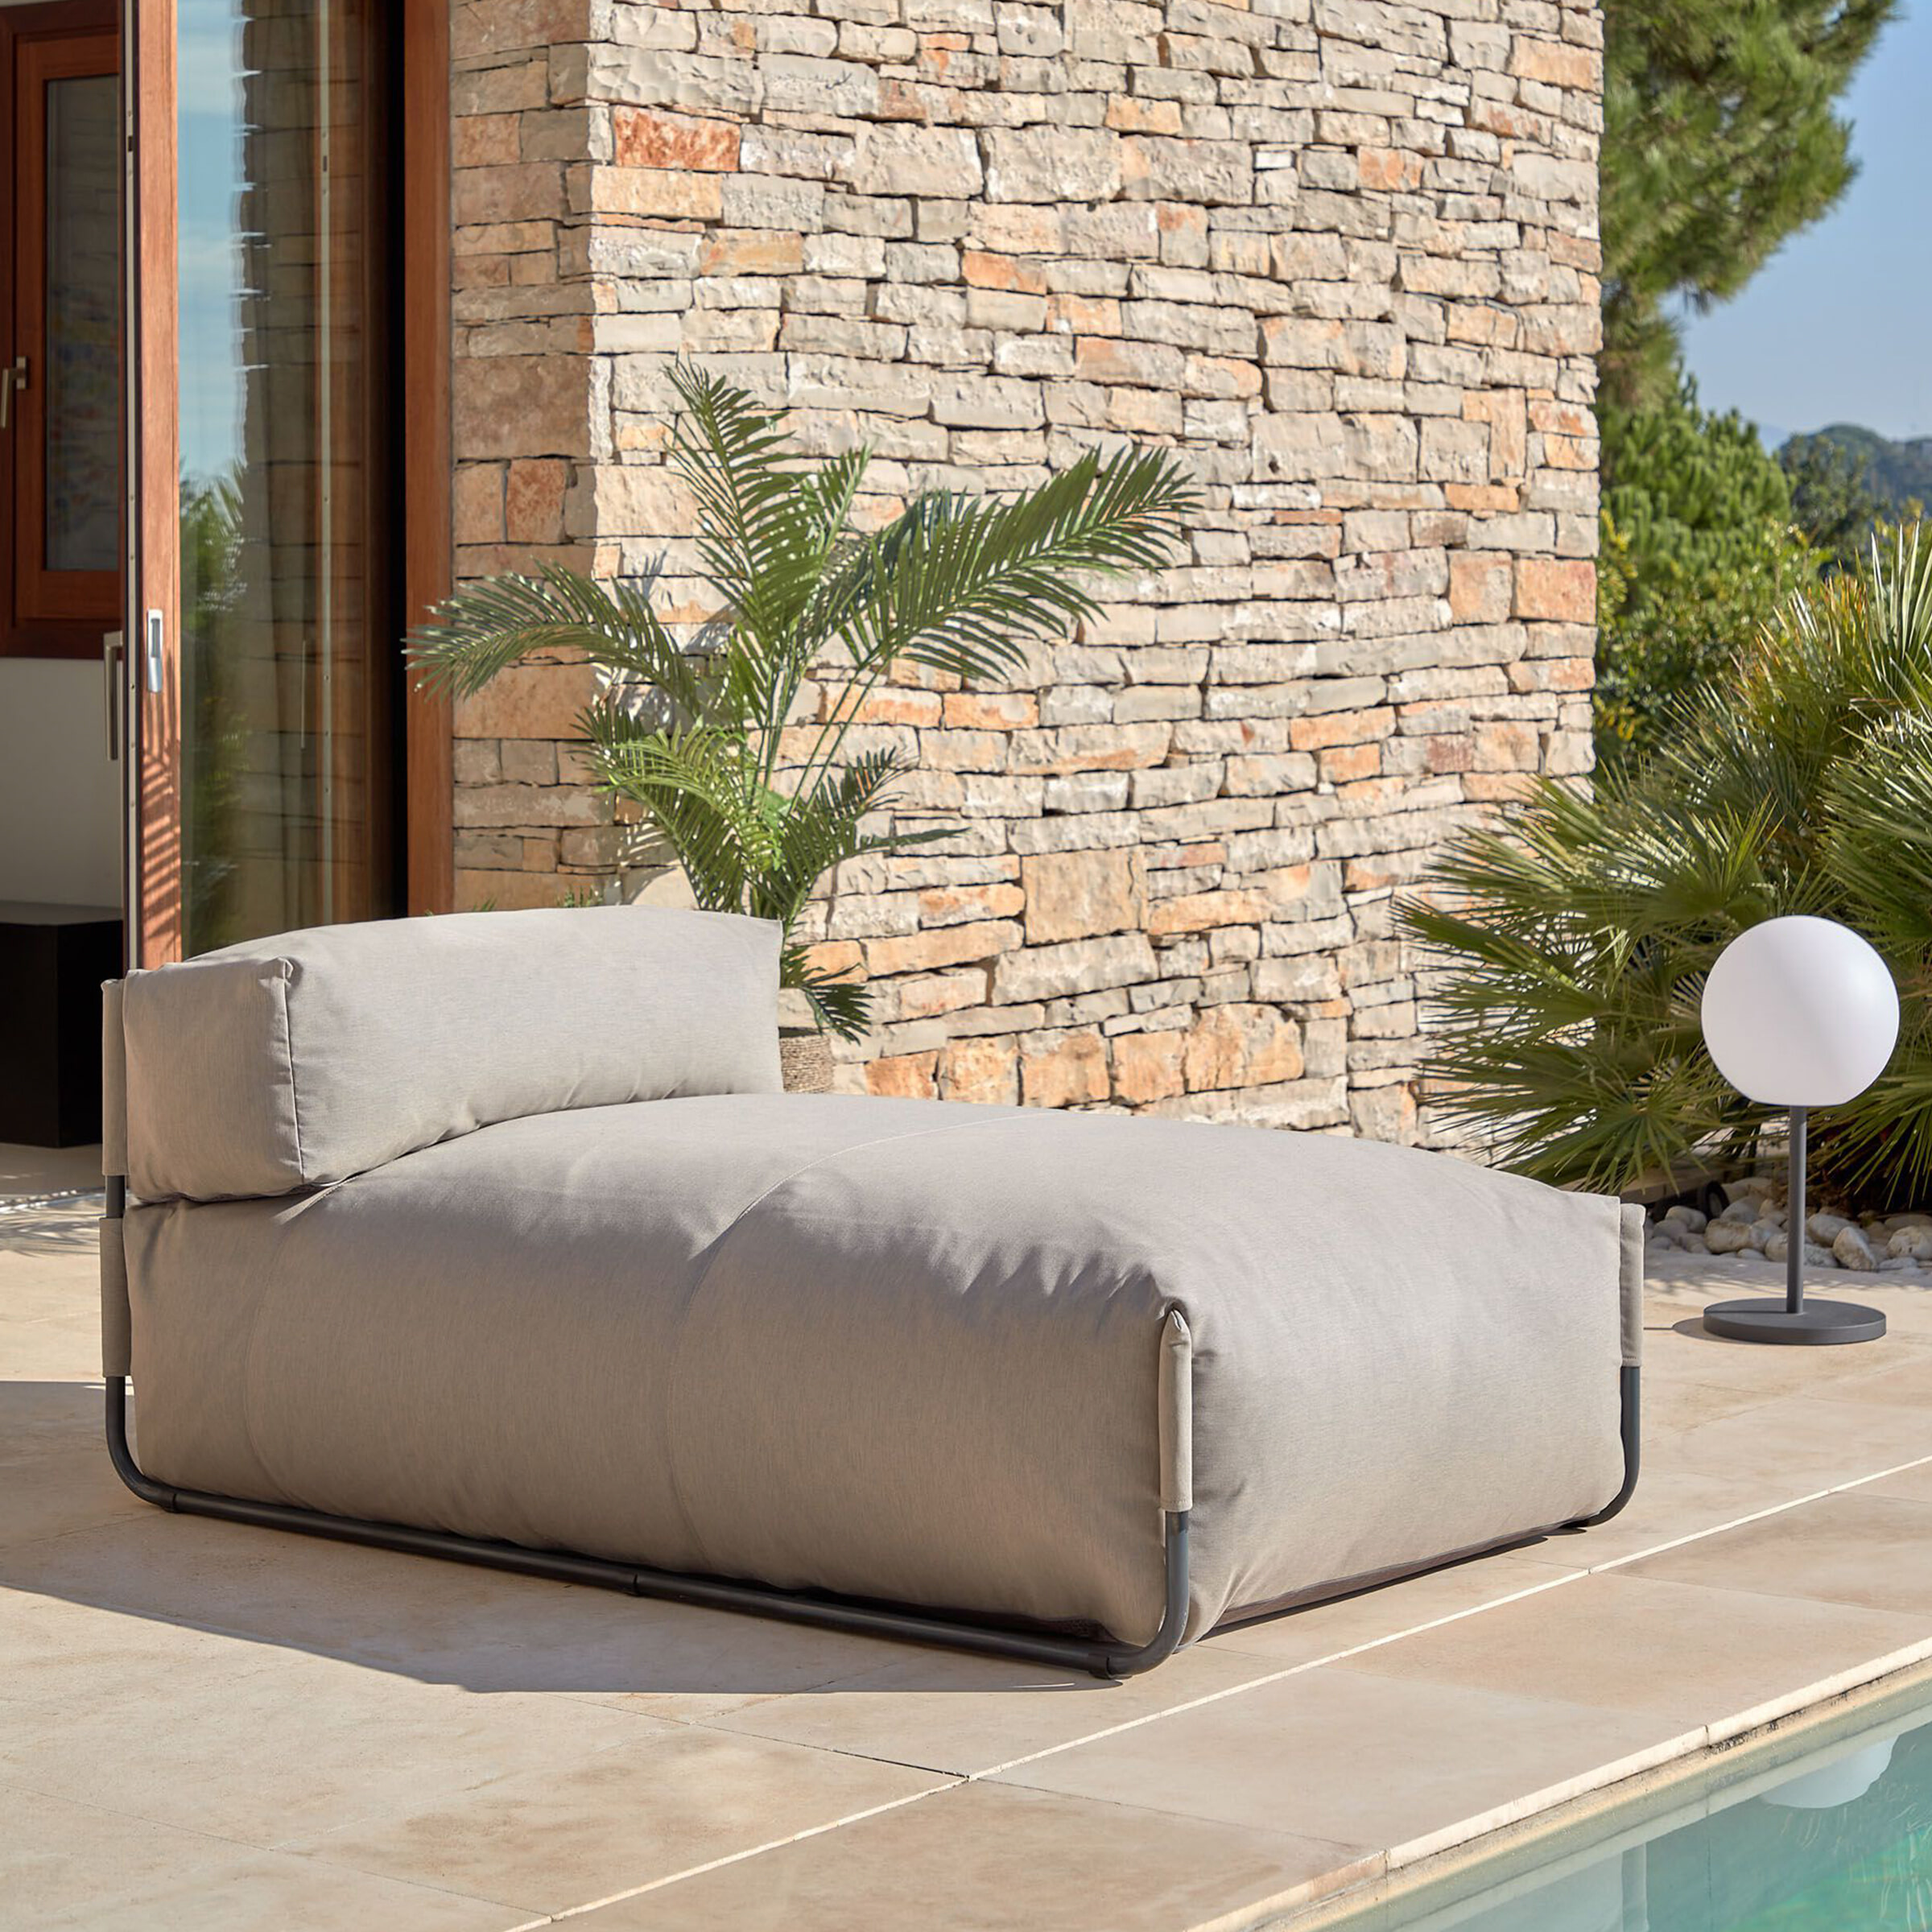 Kave Home Modulaire Outdoor Bank Square Chaise Longue - Groen